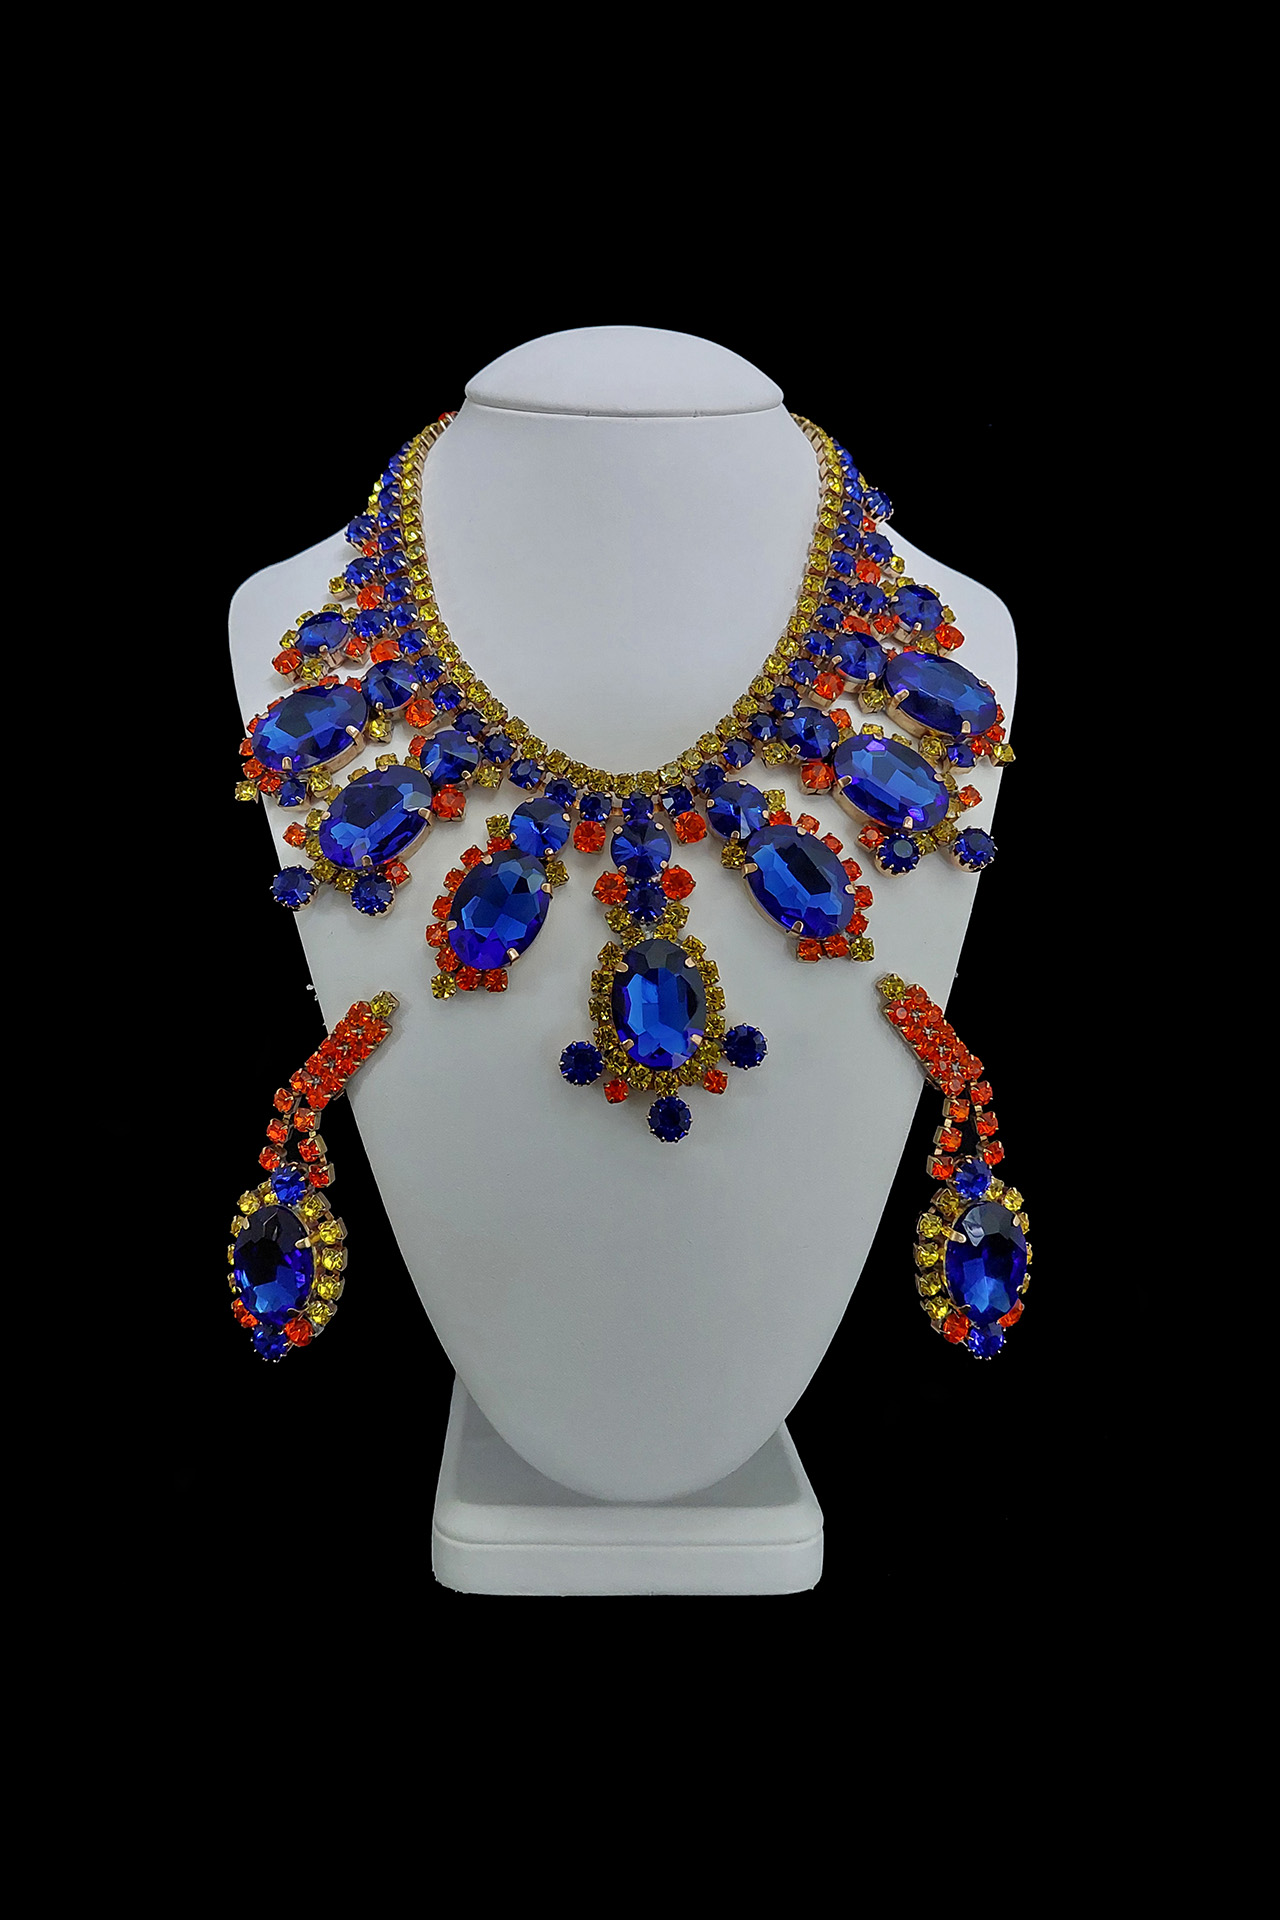 Handmade earrings and necklace from sapphire blue rhinestones